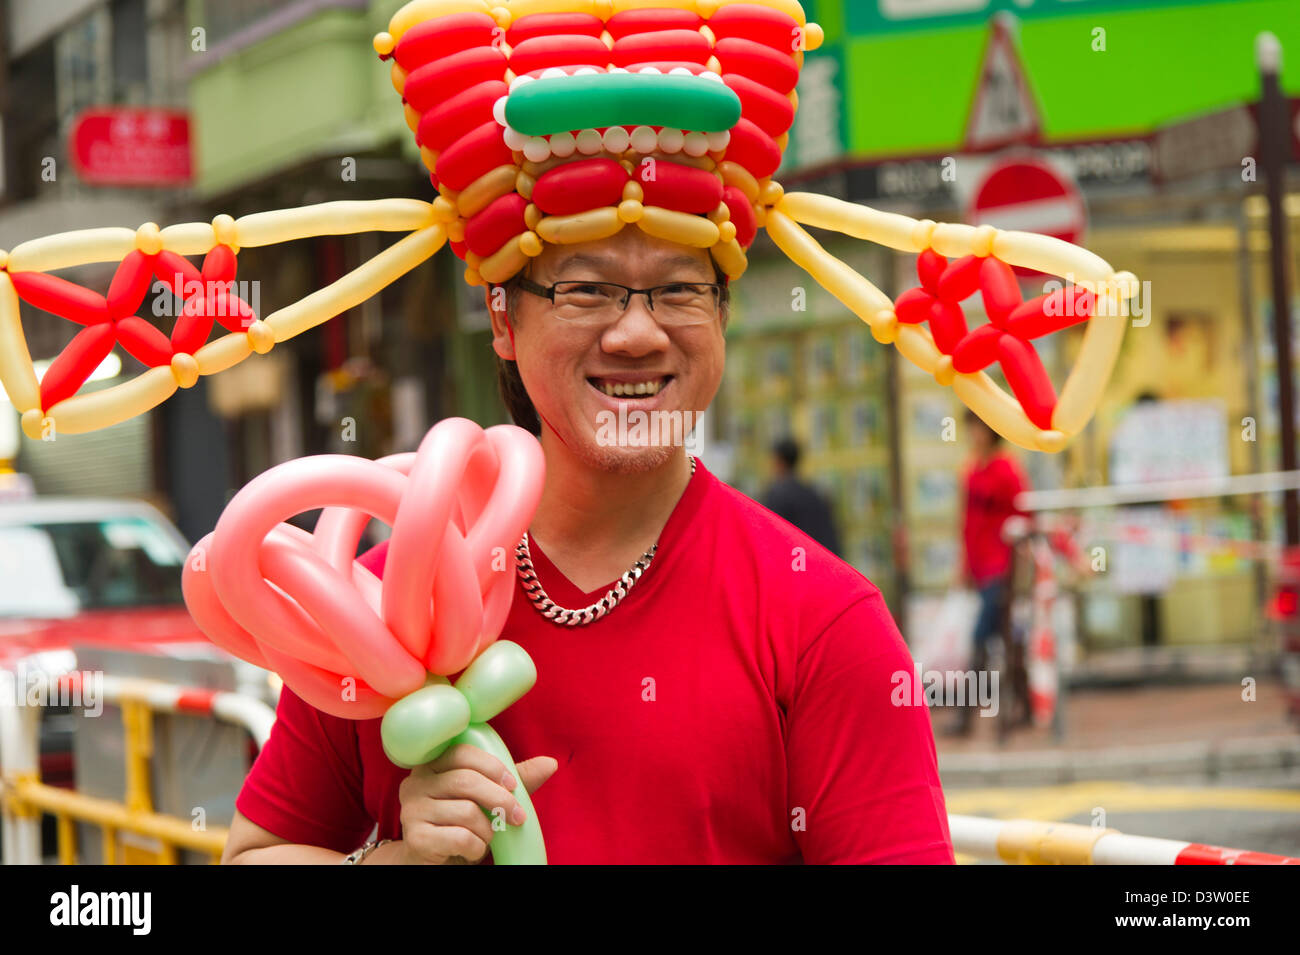 A smiling street artist shows off the balloon creation he has made Stock Photo